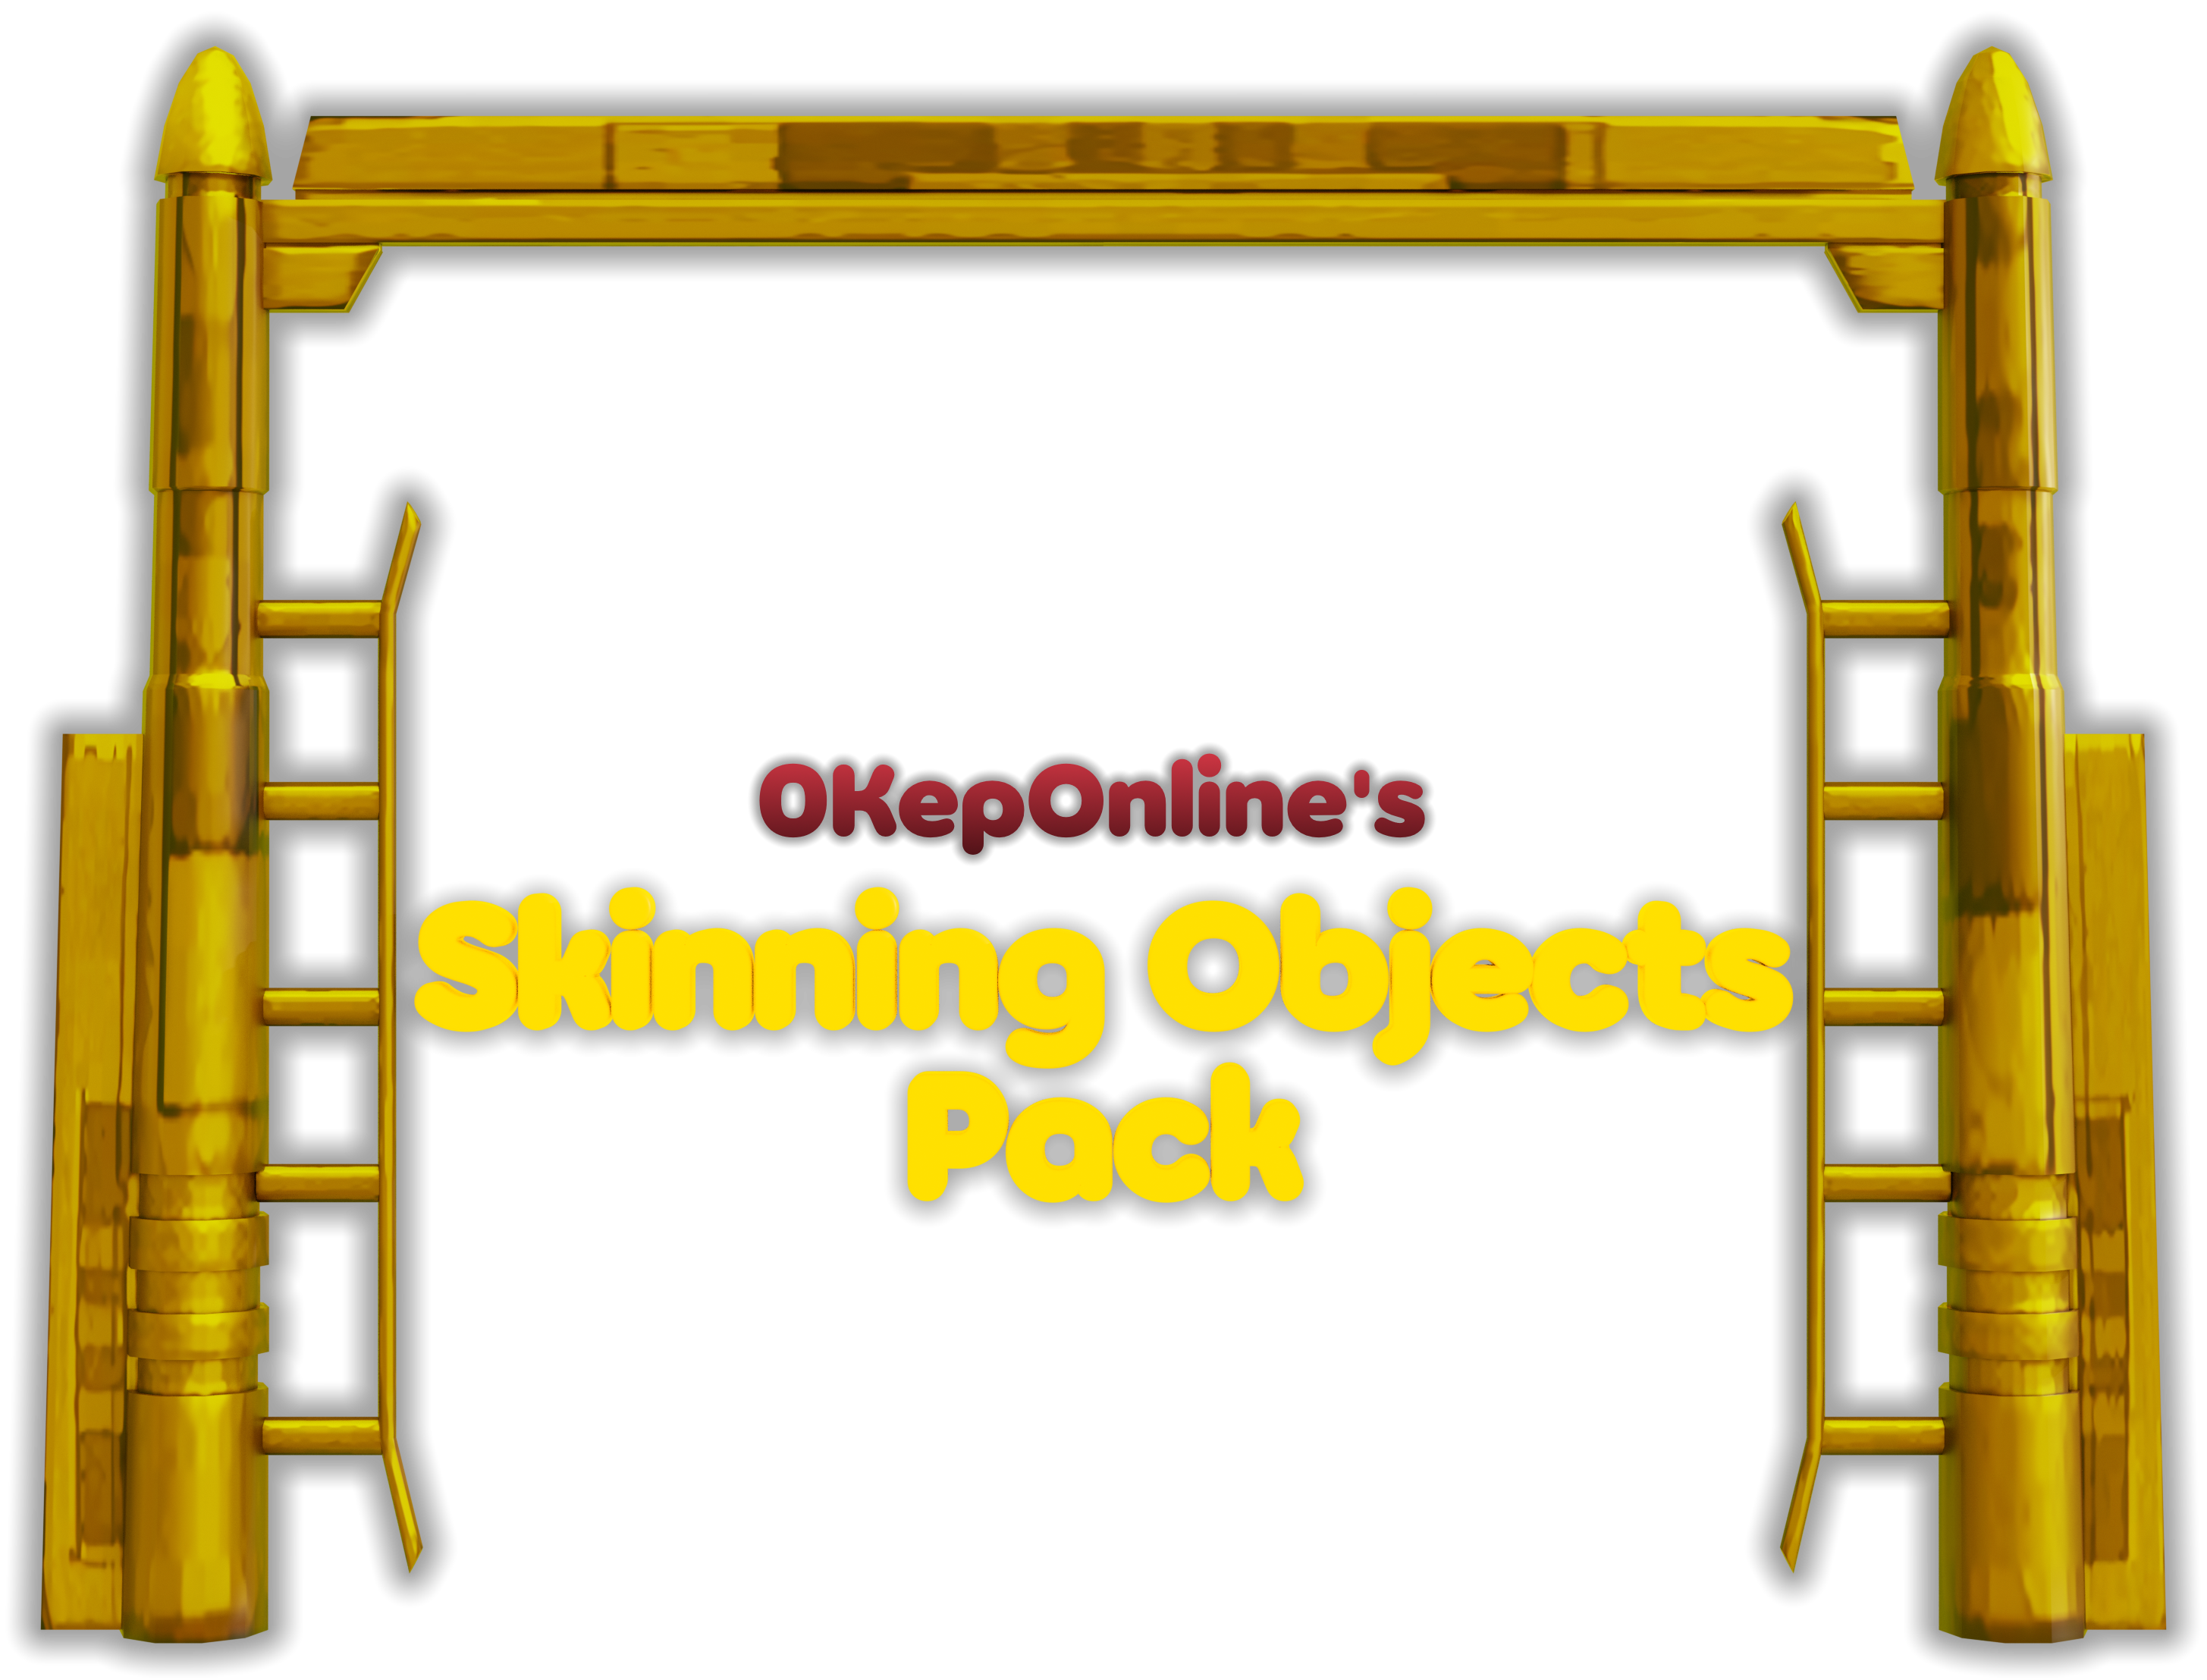 0KepOnline's Skinning Objects Pack